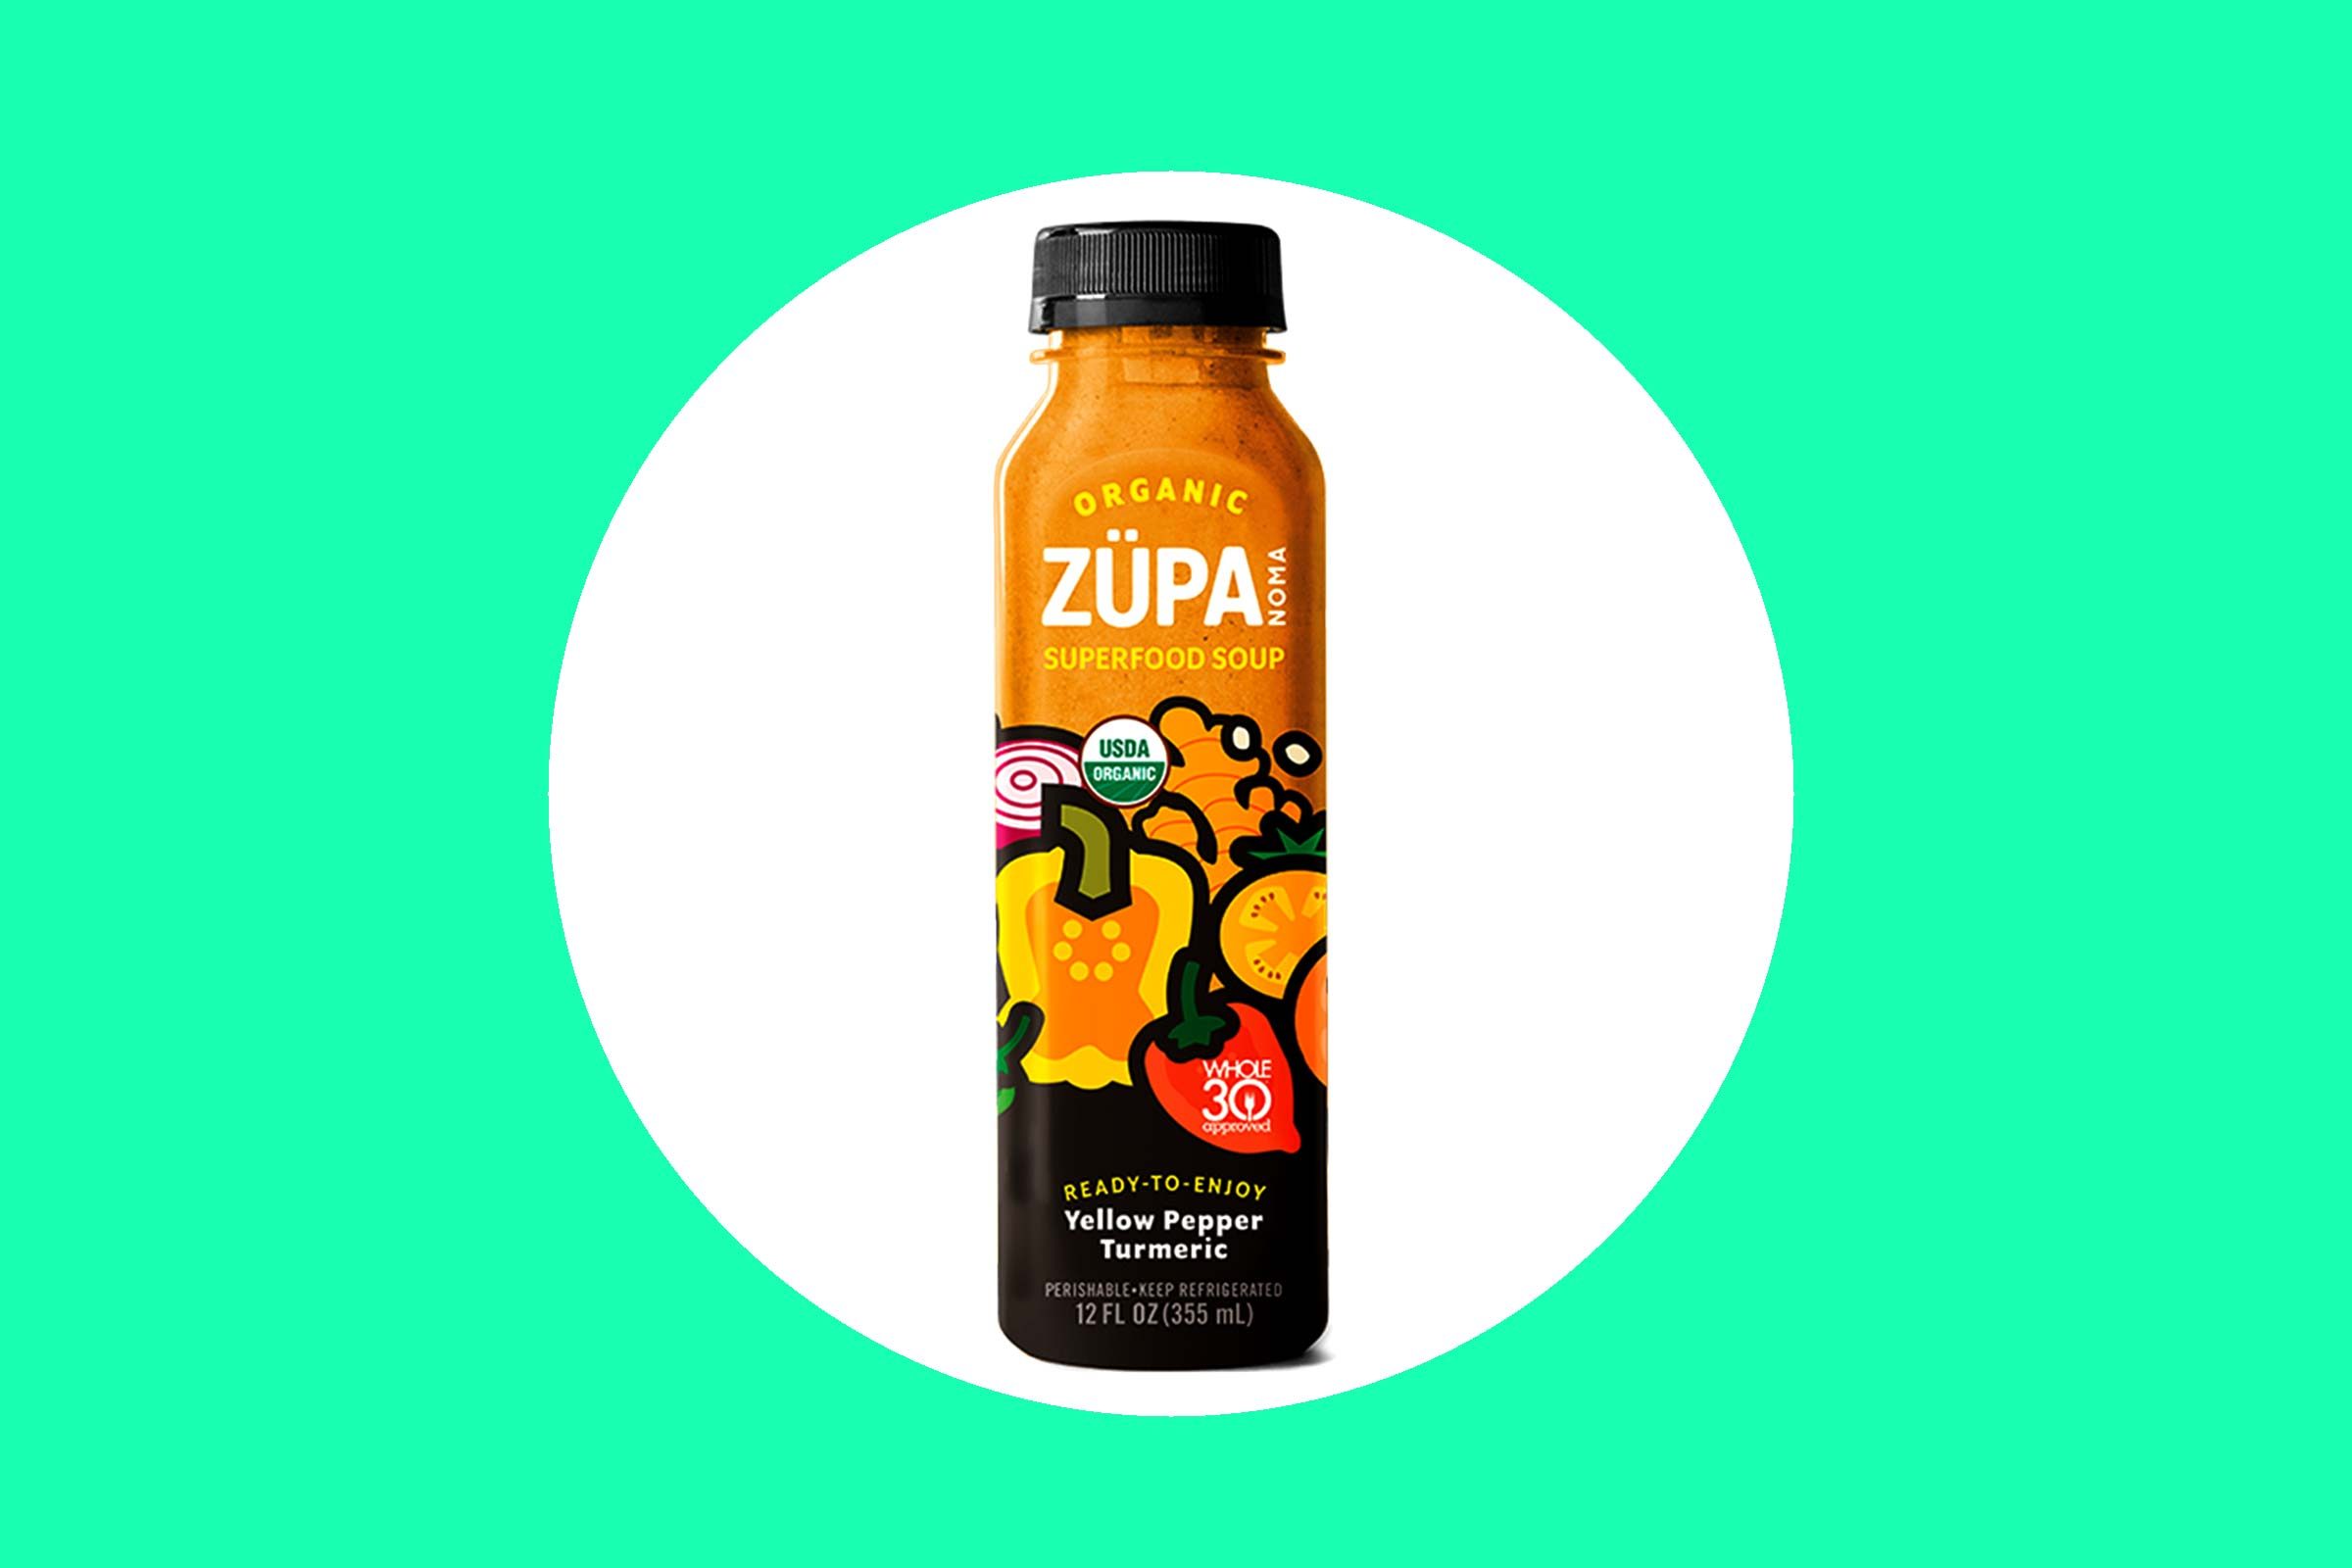 14-ZÜPA-NOMA-Healthiest-Supermarket-Foods-You-Can-Buy-drinkzupa.com